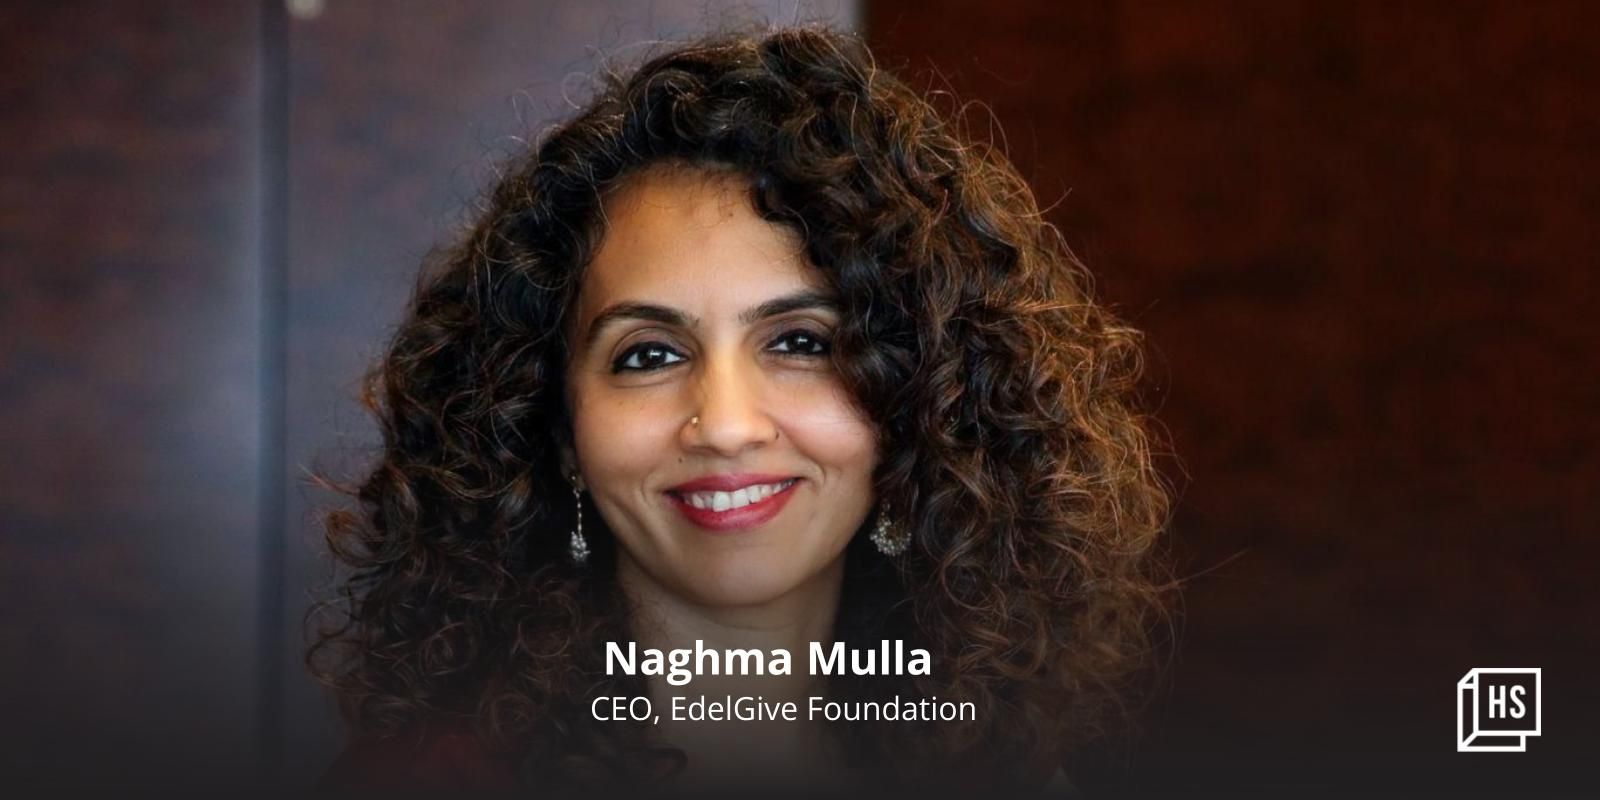 The only factor that dictates a woman’s ability to lead is her knowing she can do it: EdelGive Foundation CEO Naghma Mulla